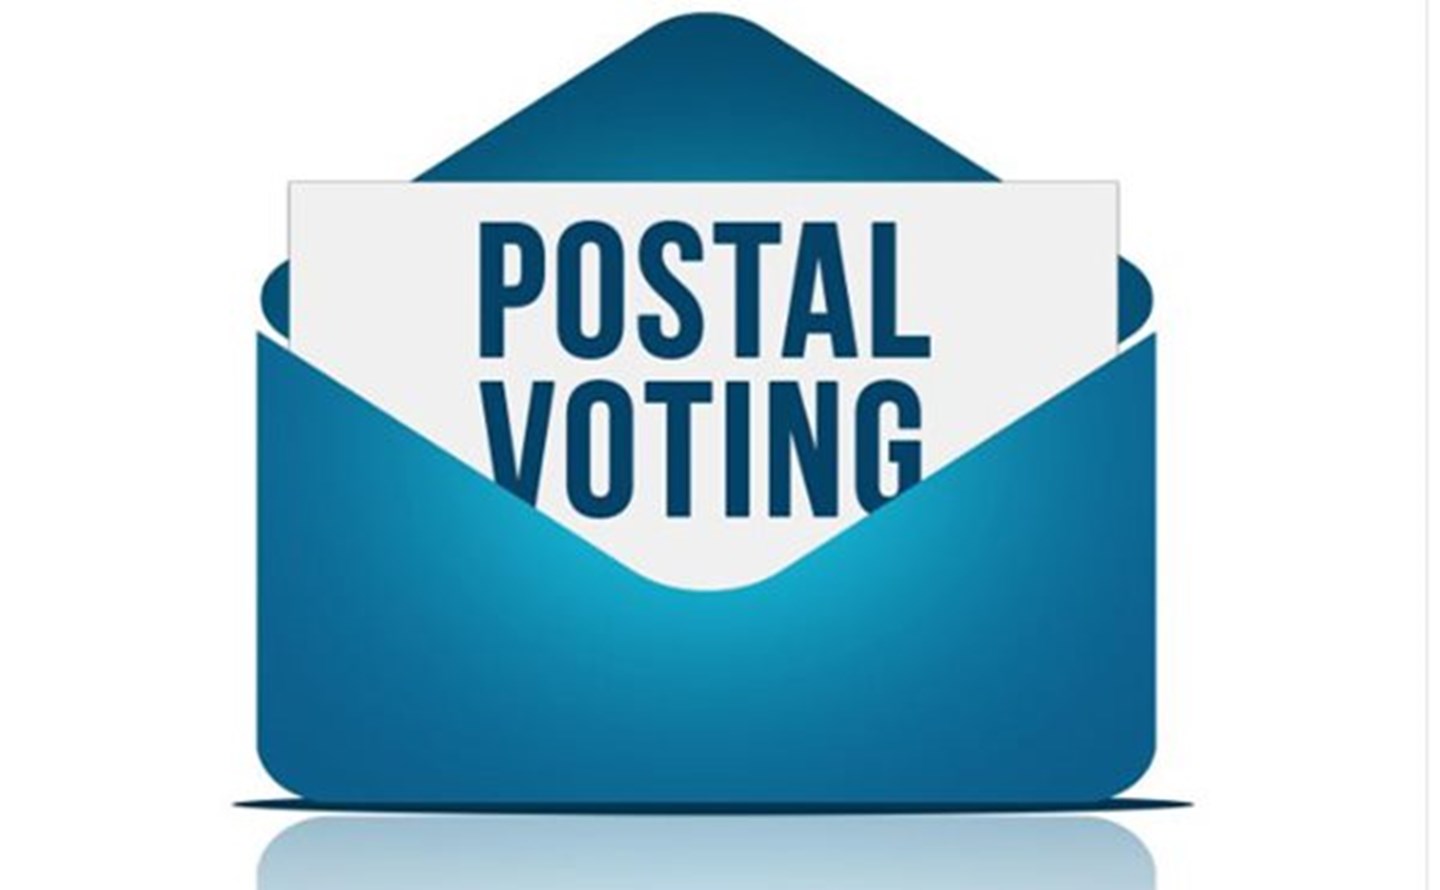 picture of postal voting information